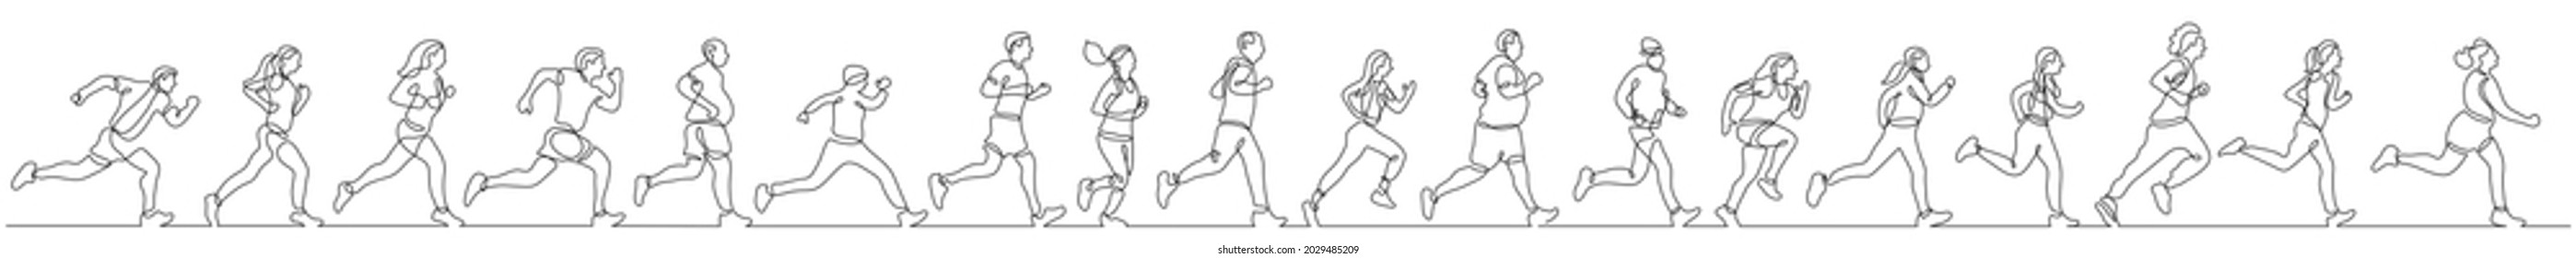 Continuous Line Drawing Of Group Of Diverse People Exercising Jogging